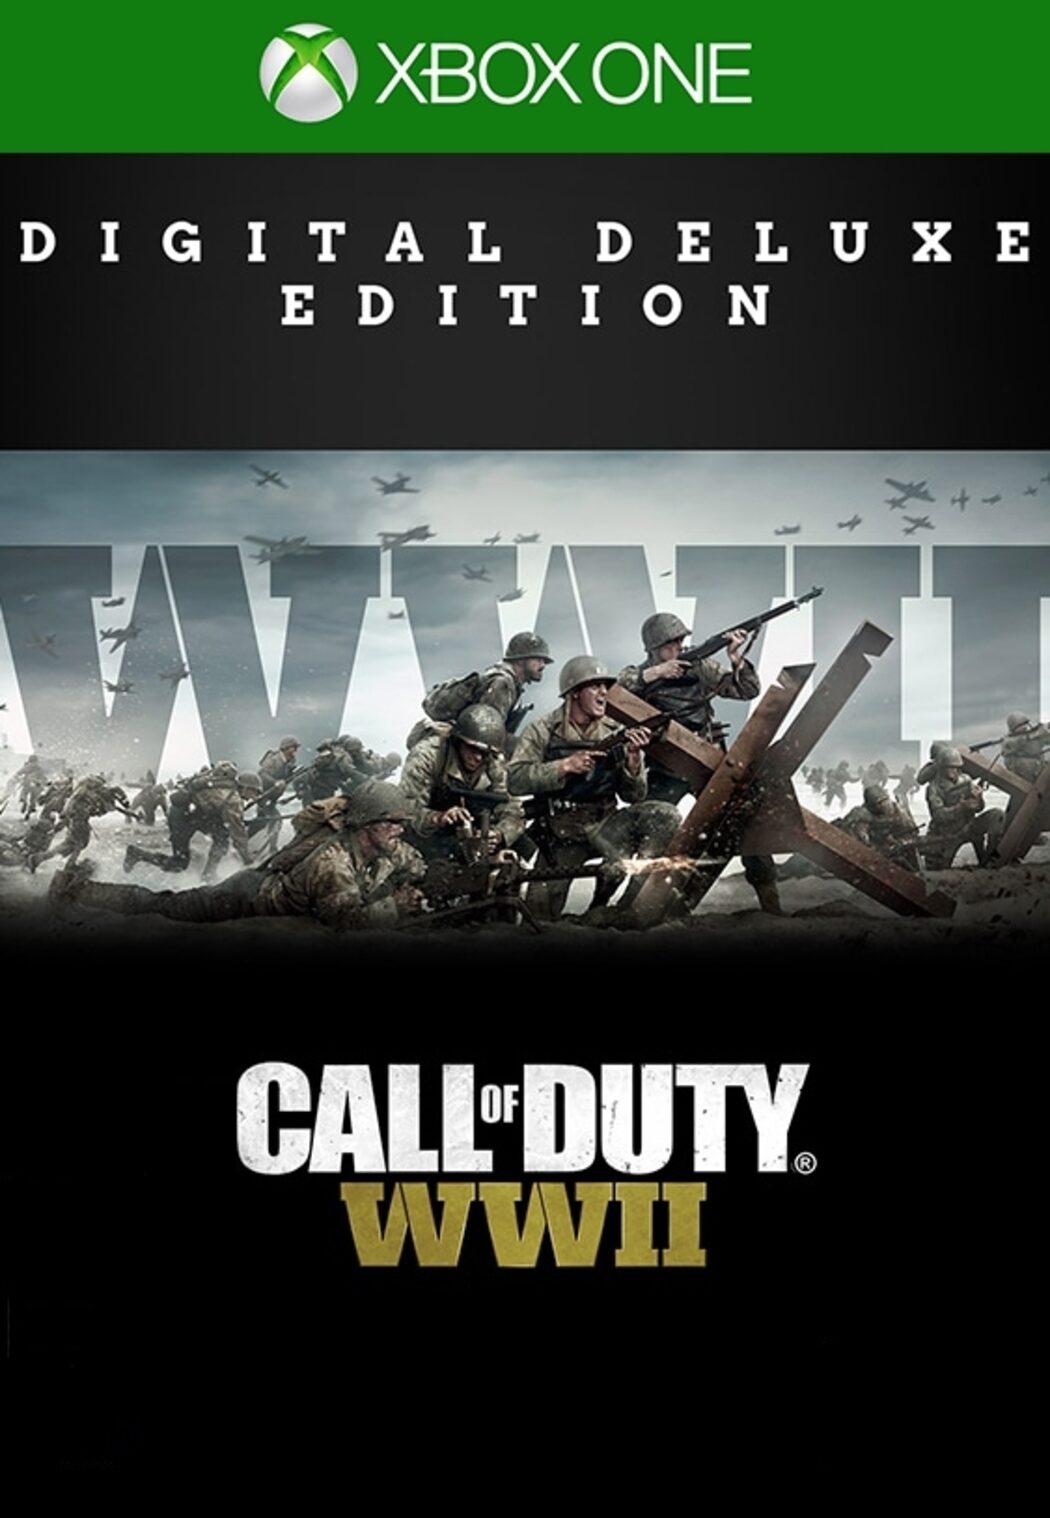 Call of Duty WWII COD World War 2 (XBOX ONE, 2017) Brand New Factory Sealed  XB1